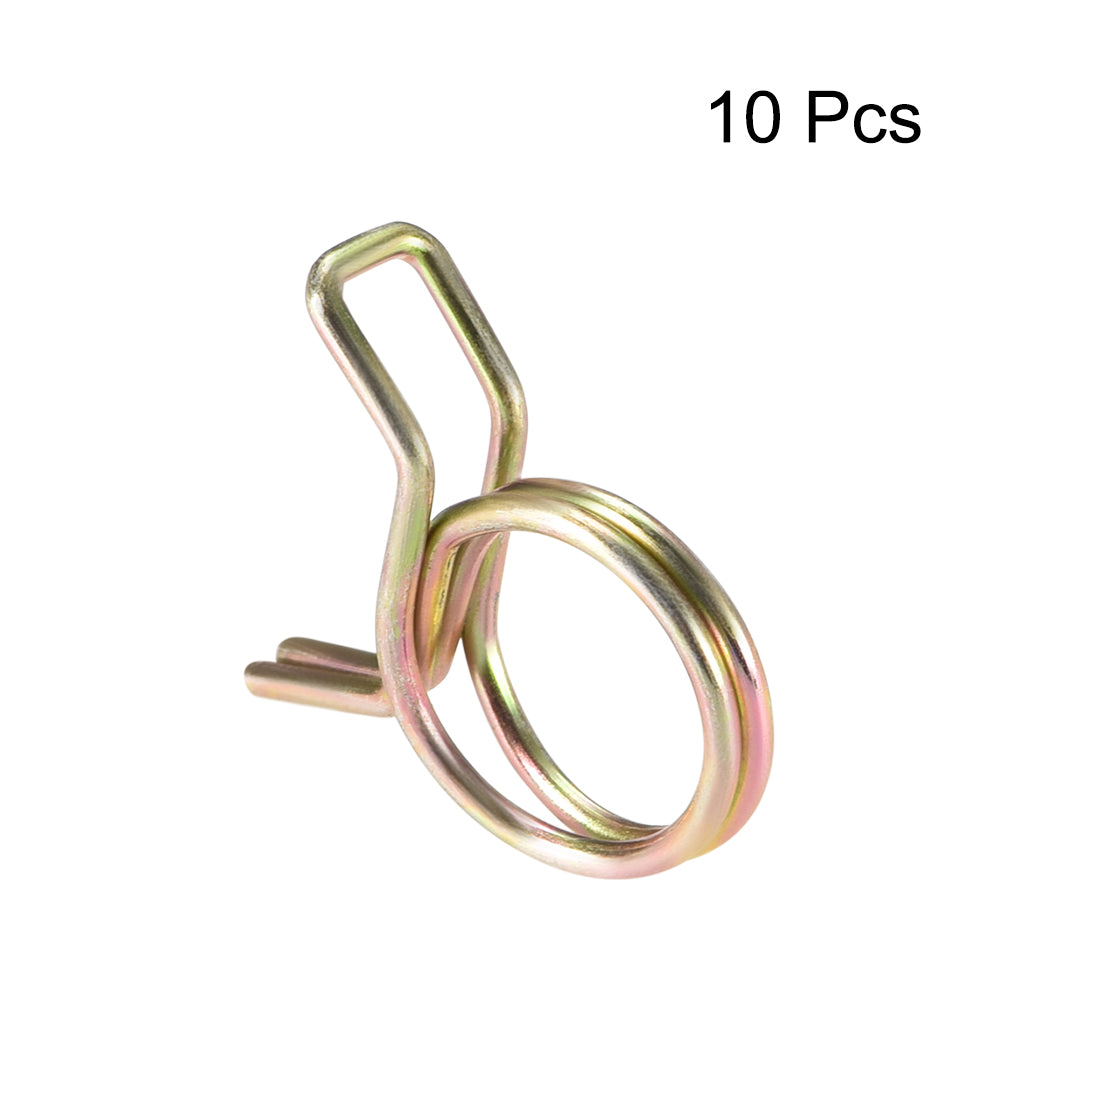 uxcell Uxcell Double Wire Spring Hose Clamp 11mm Fuel Line Tube Spring Clips Zinc Plated 10Pcs